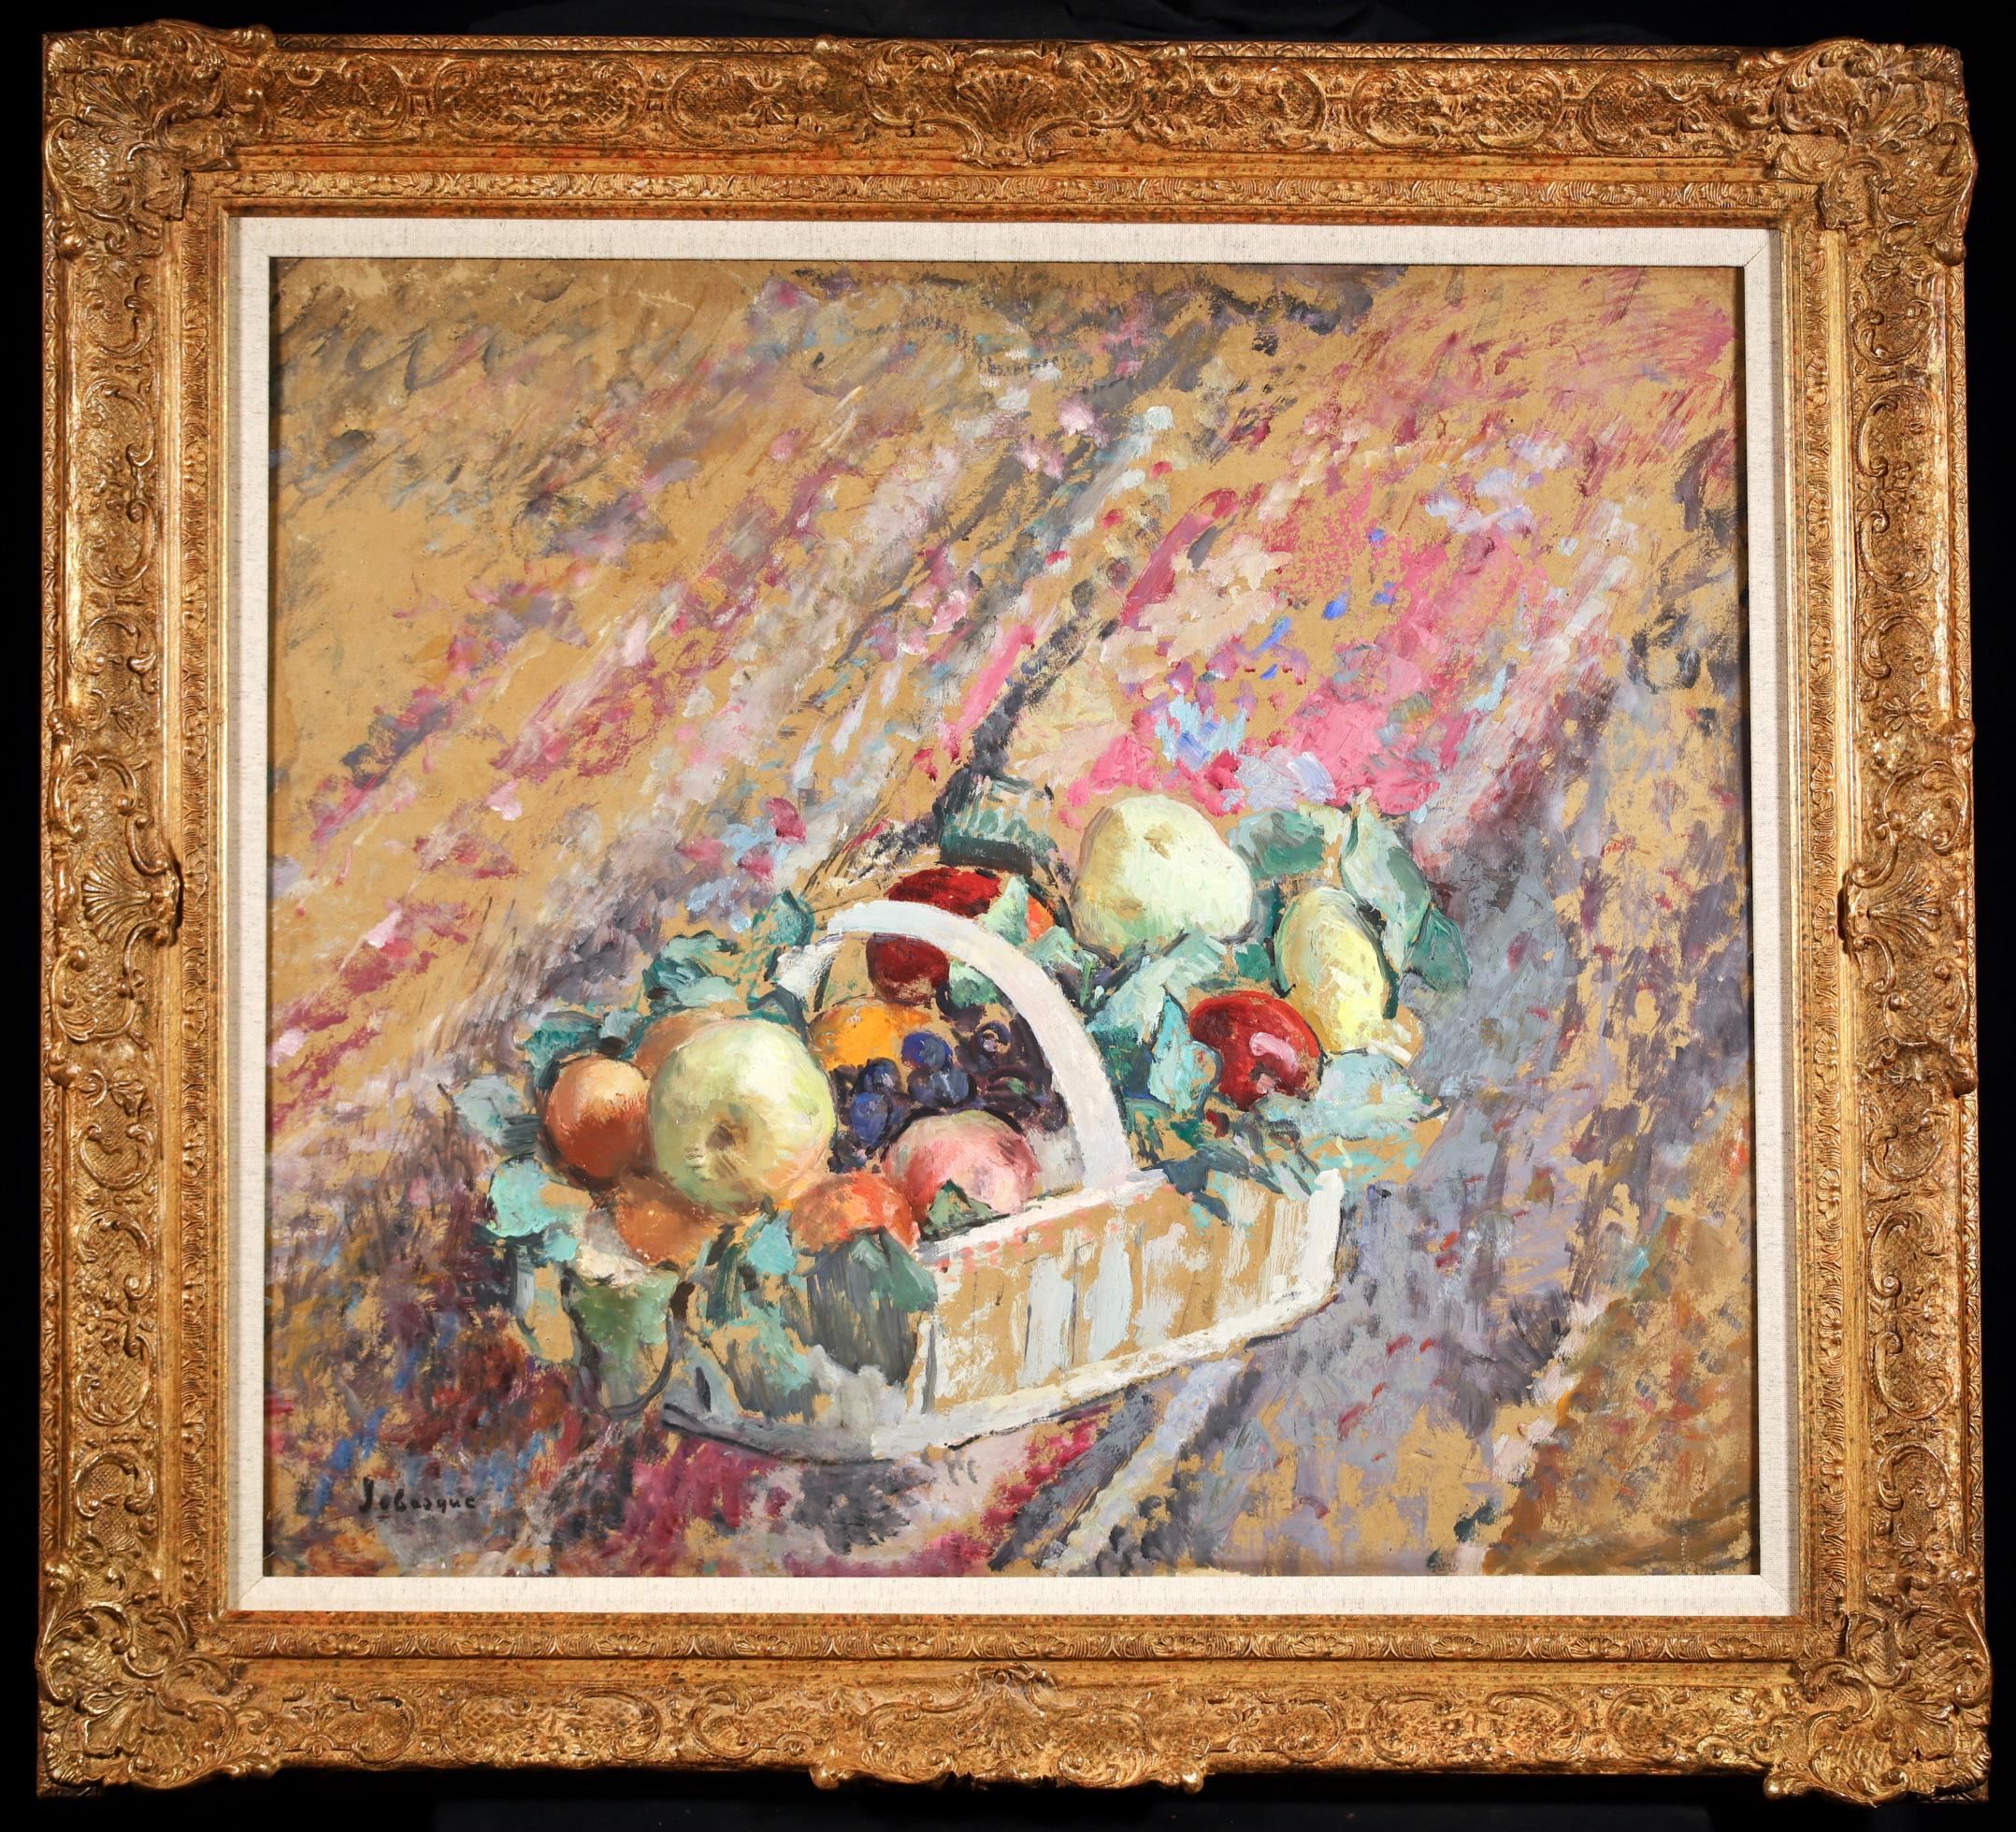 Signed oil on board still life circa 1937 by French post impressionist painter Henri Lebasque. The work depicts a basket of fruit filled with apples, grapes and oranges.

Signature:
Signed lower left

Dimensions:
Framed: 33"x36"
Unframed: